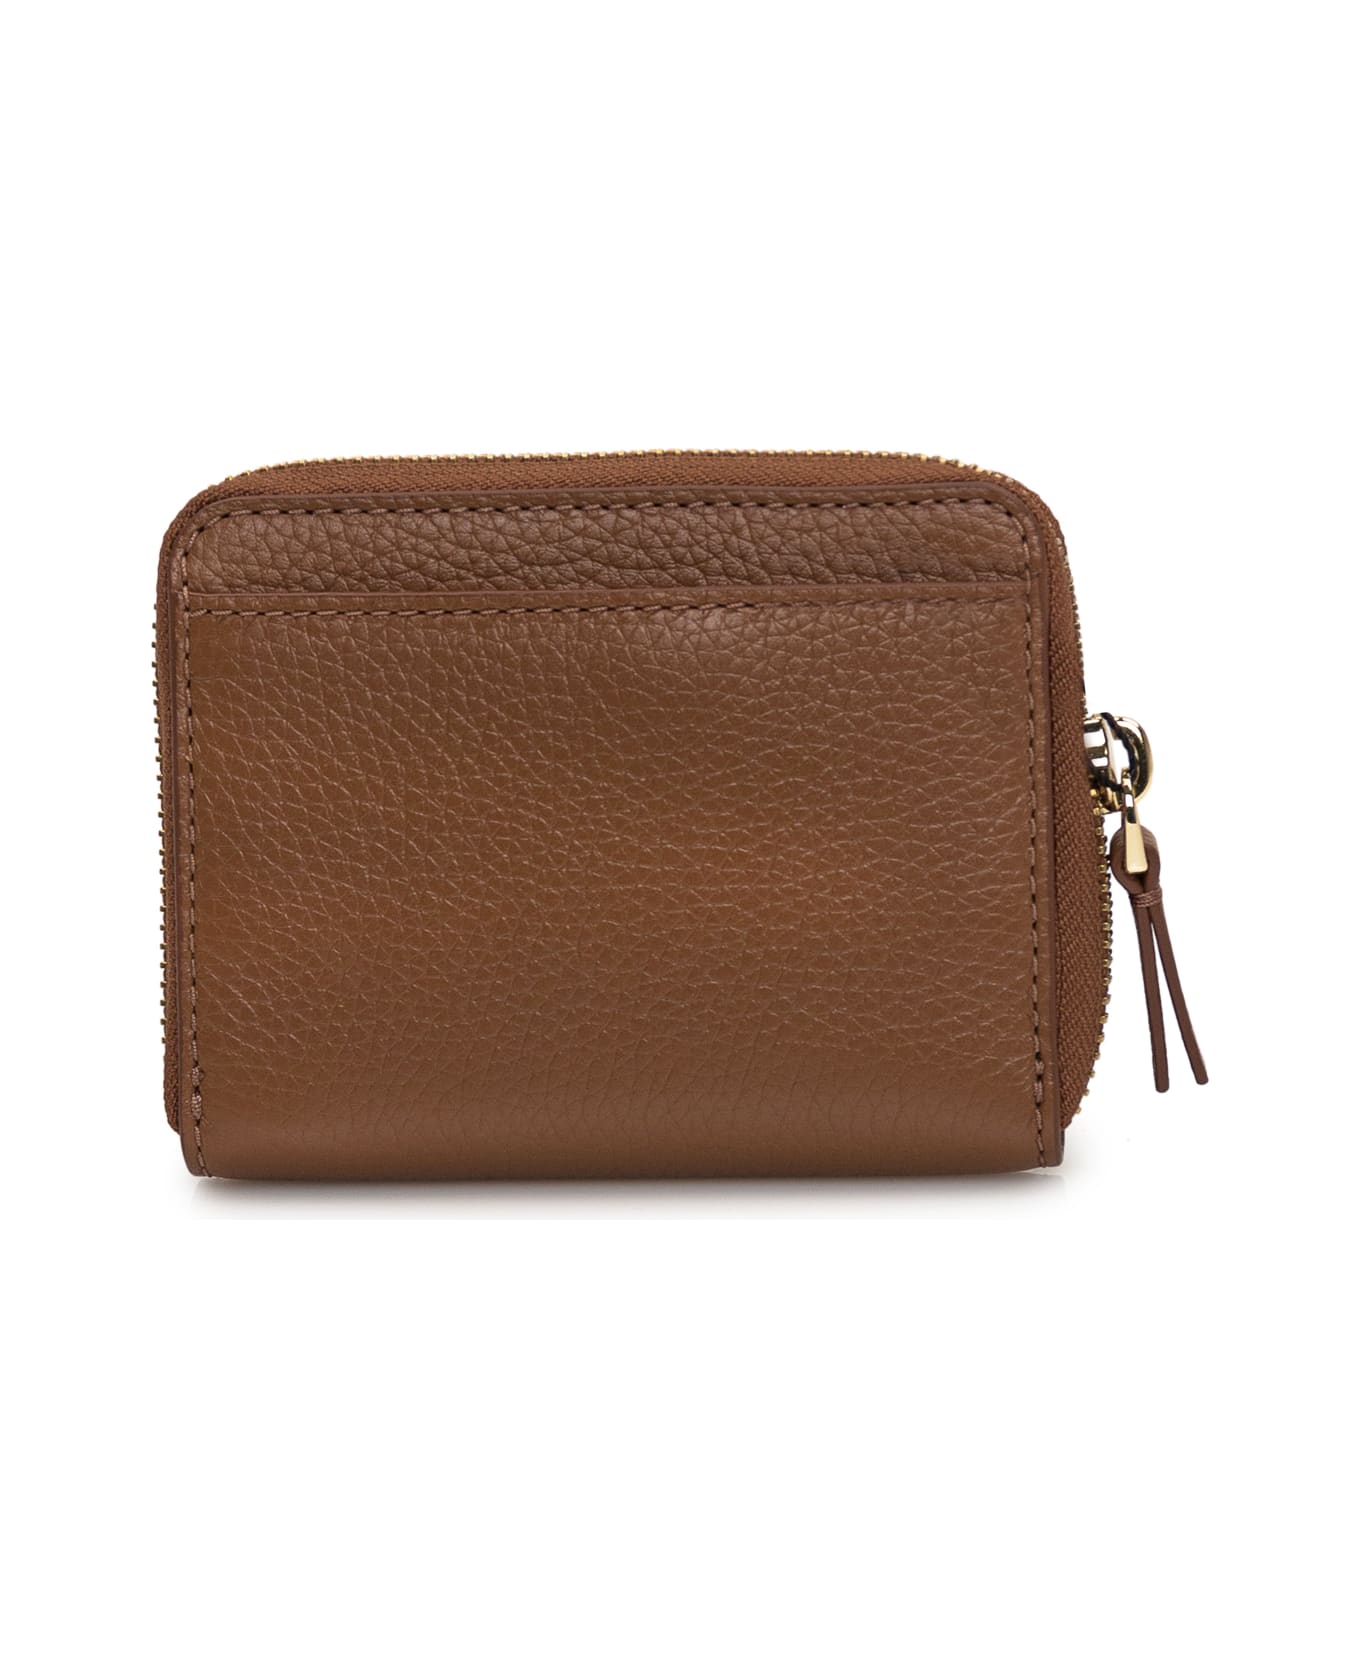 Marc Jacobs Leather Wallet With Zipper - ARGAN OIL